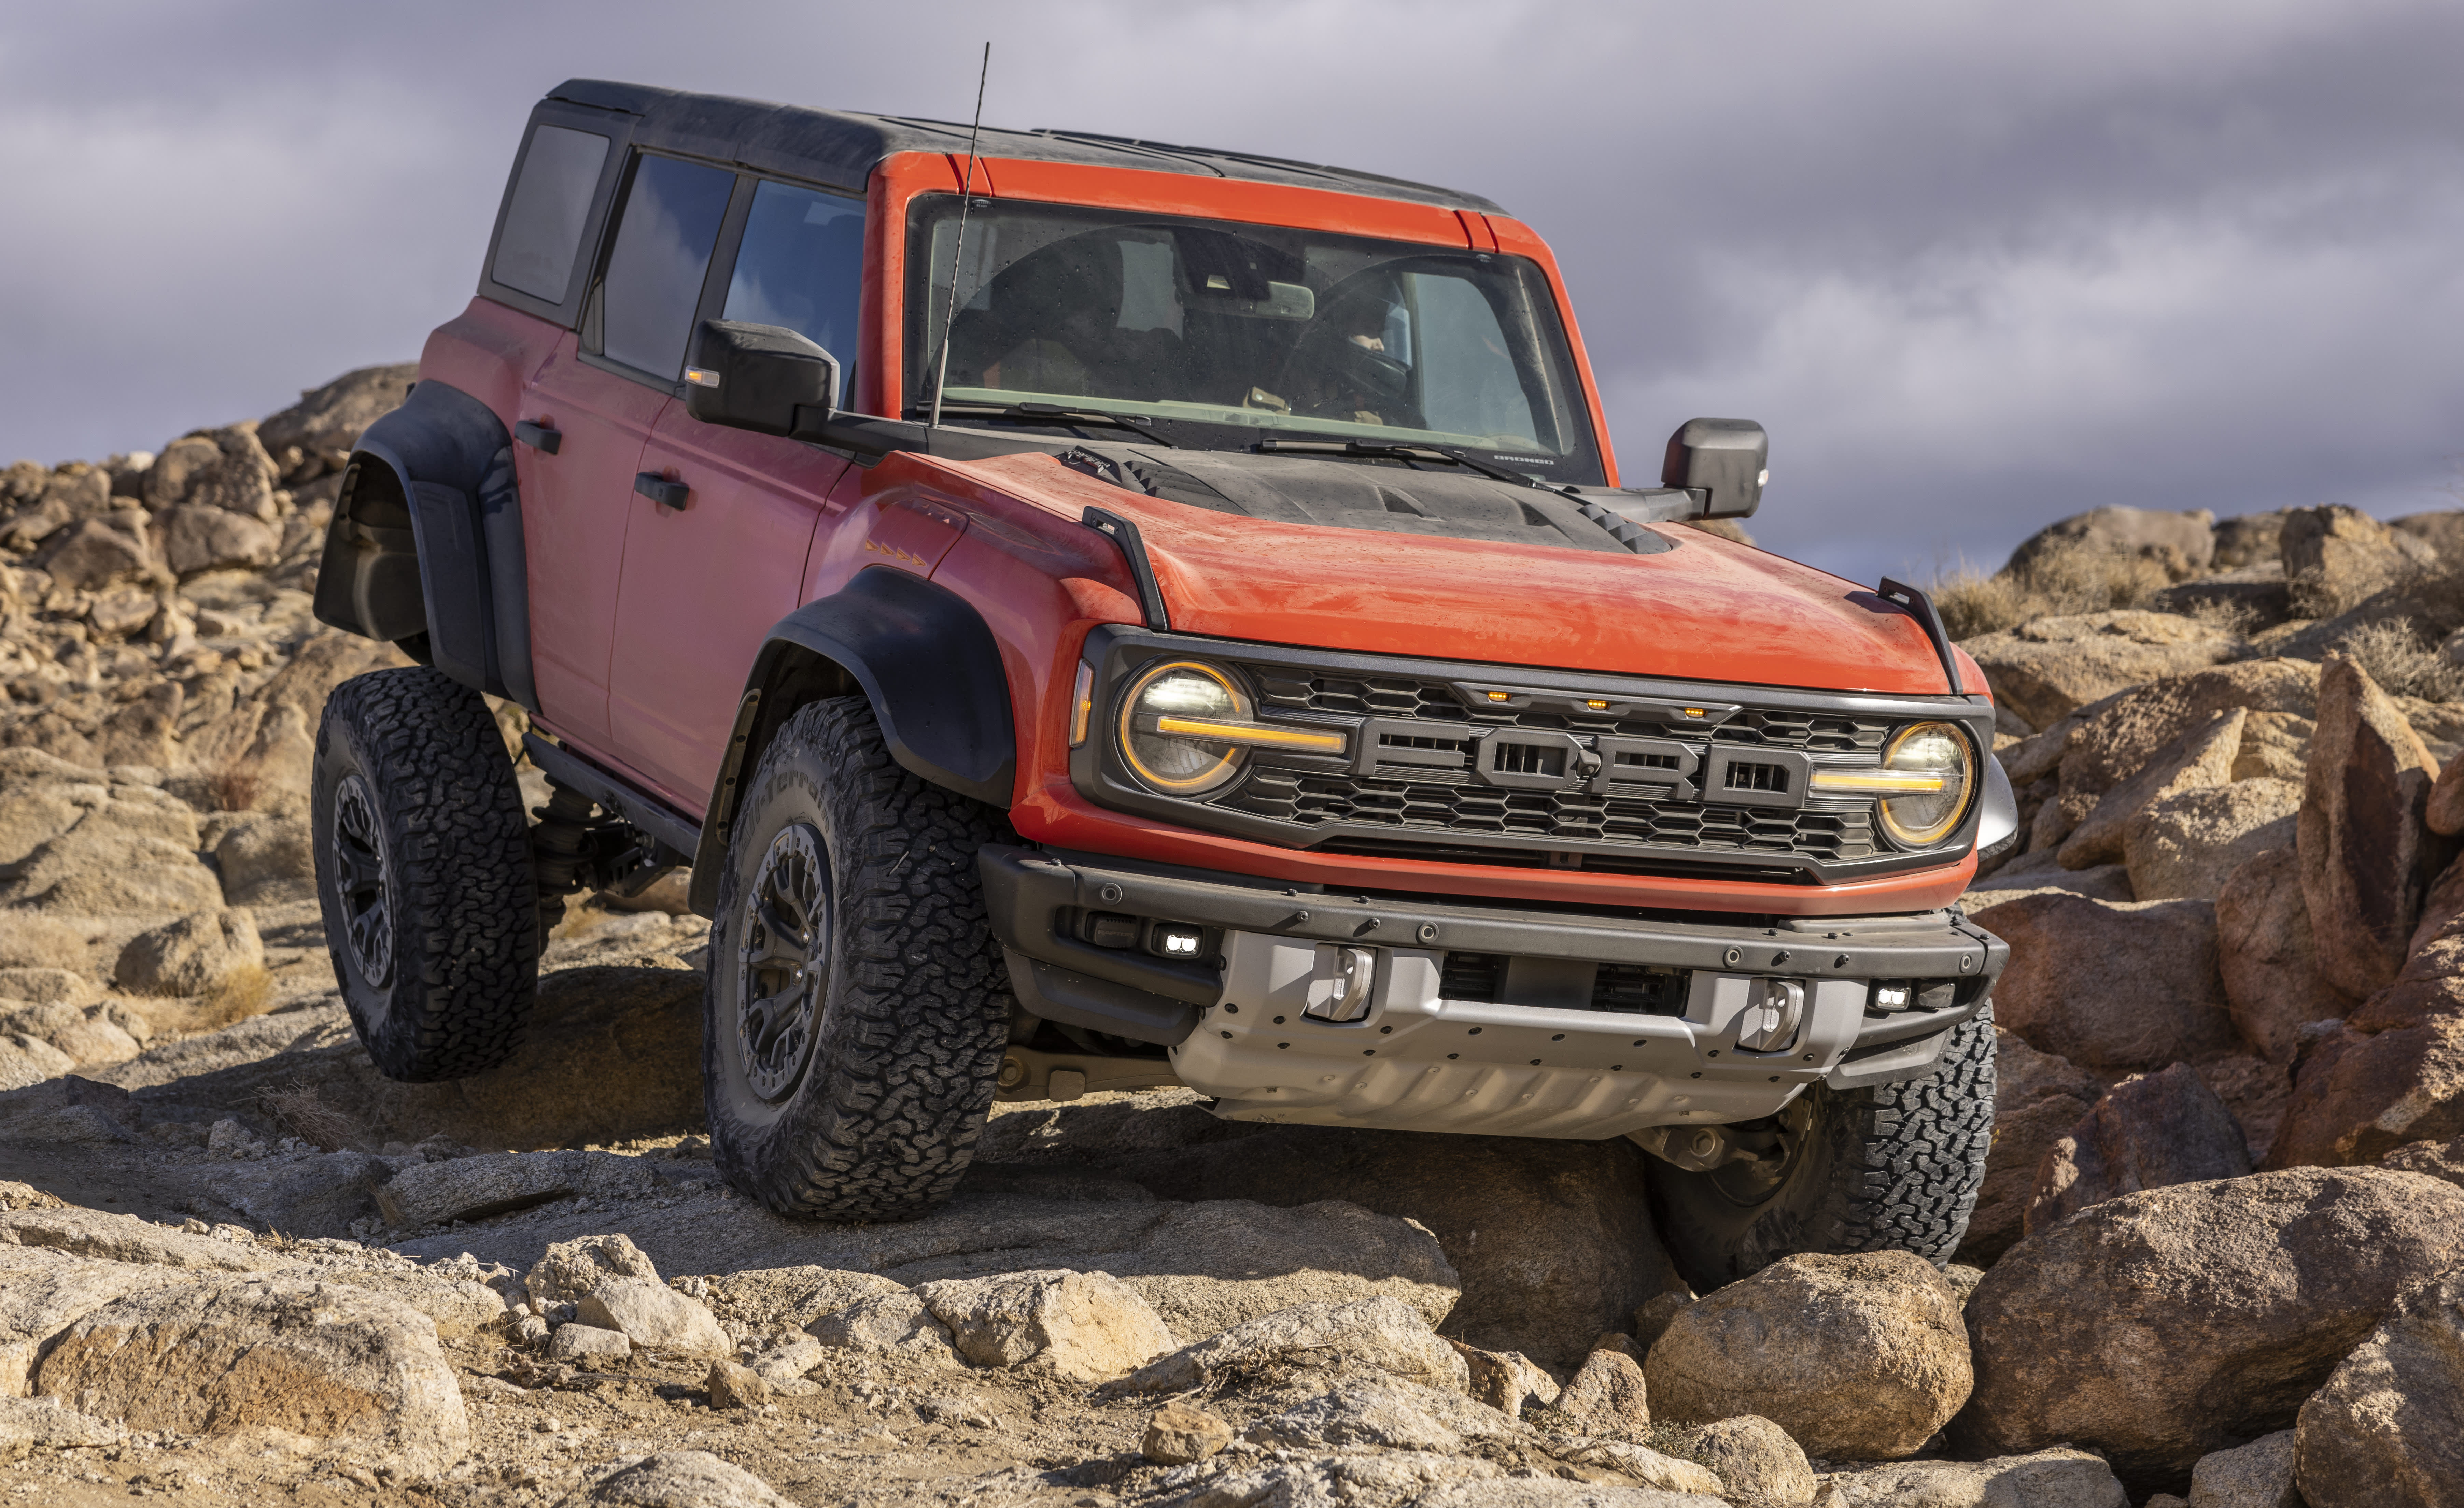 The Ford Bronco Raptor SUV is a “desert racer,” says the CEO